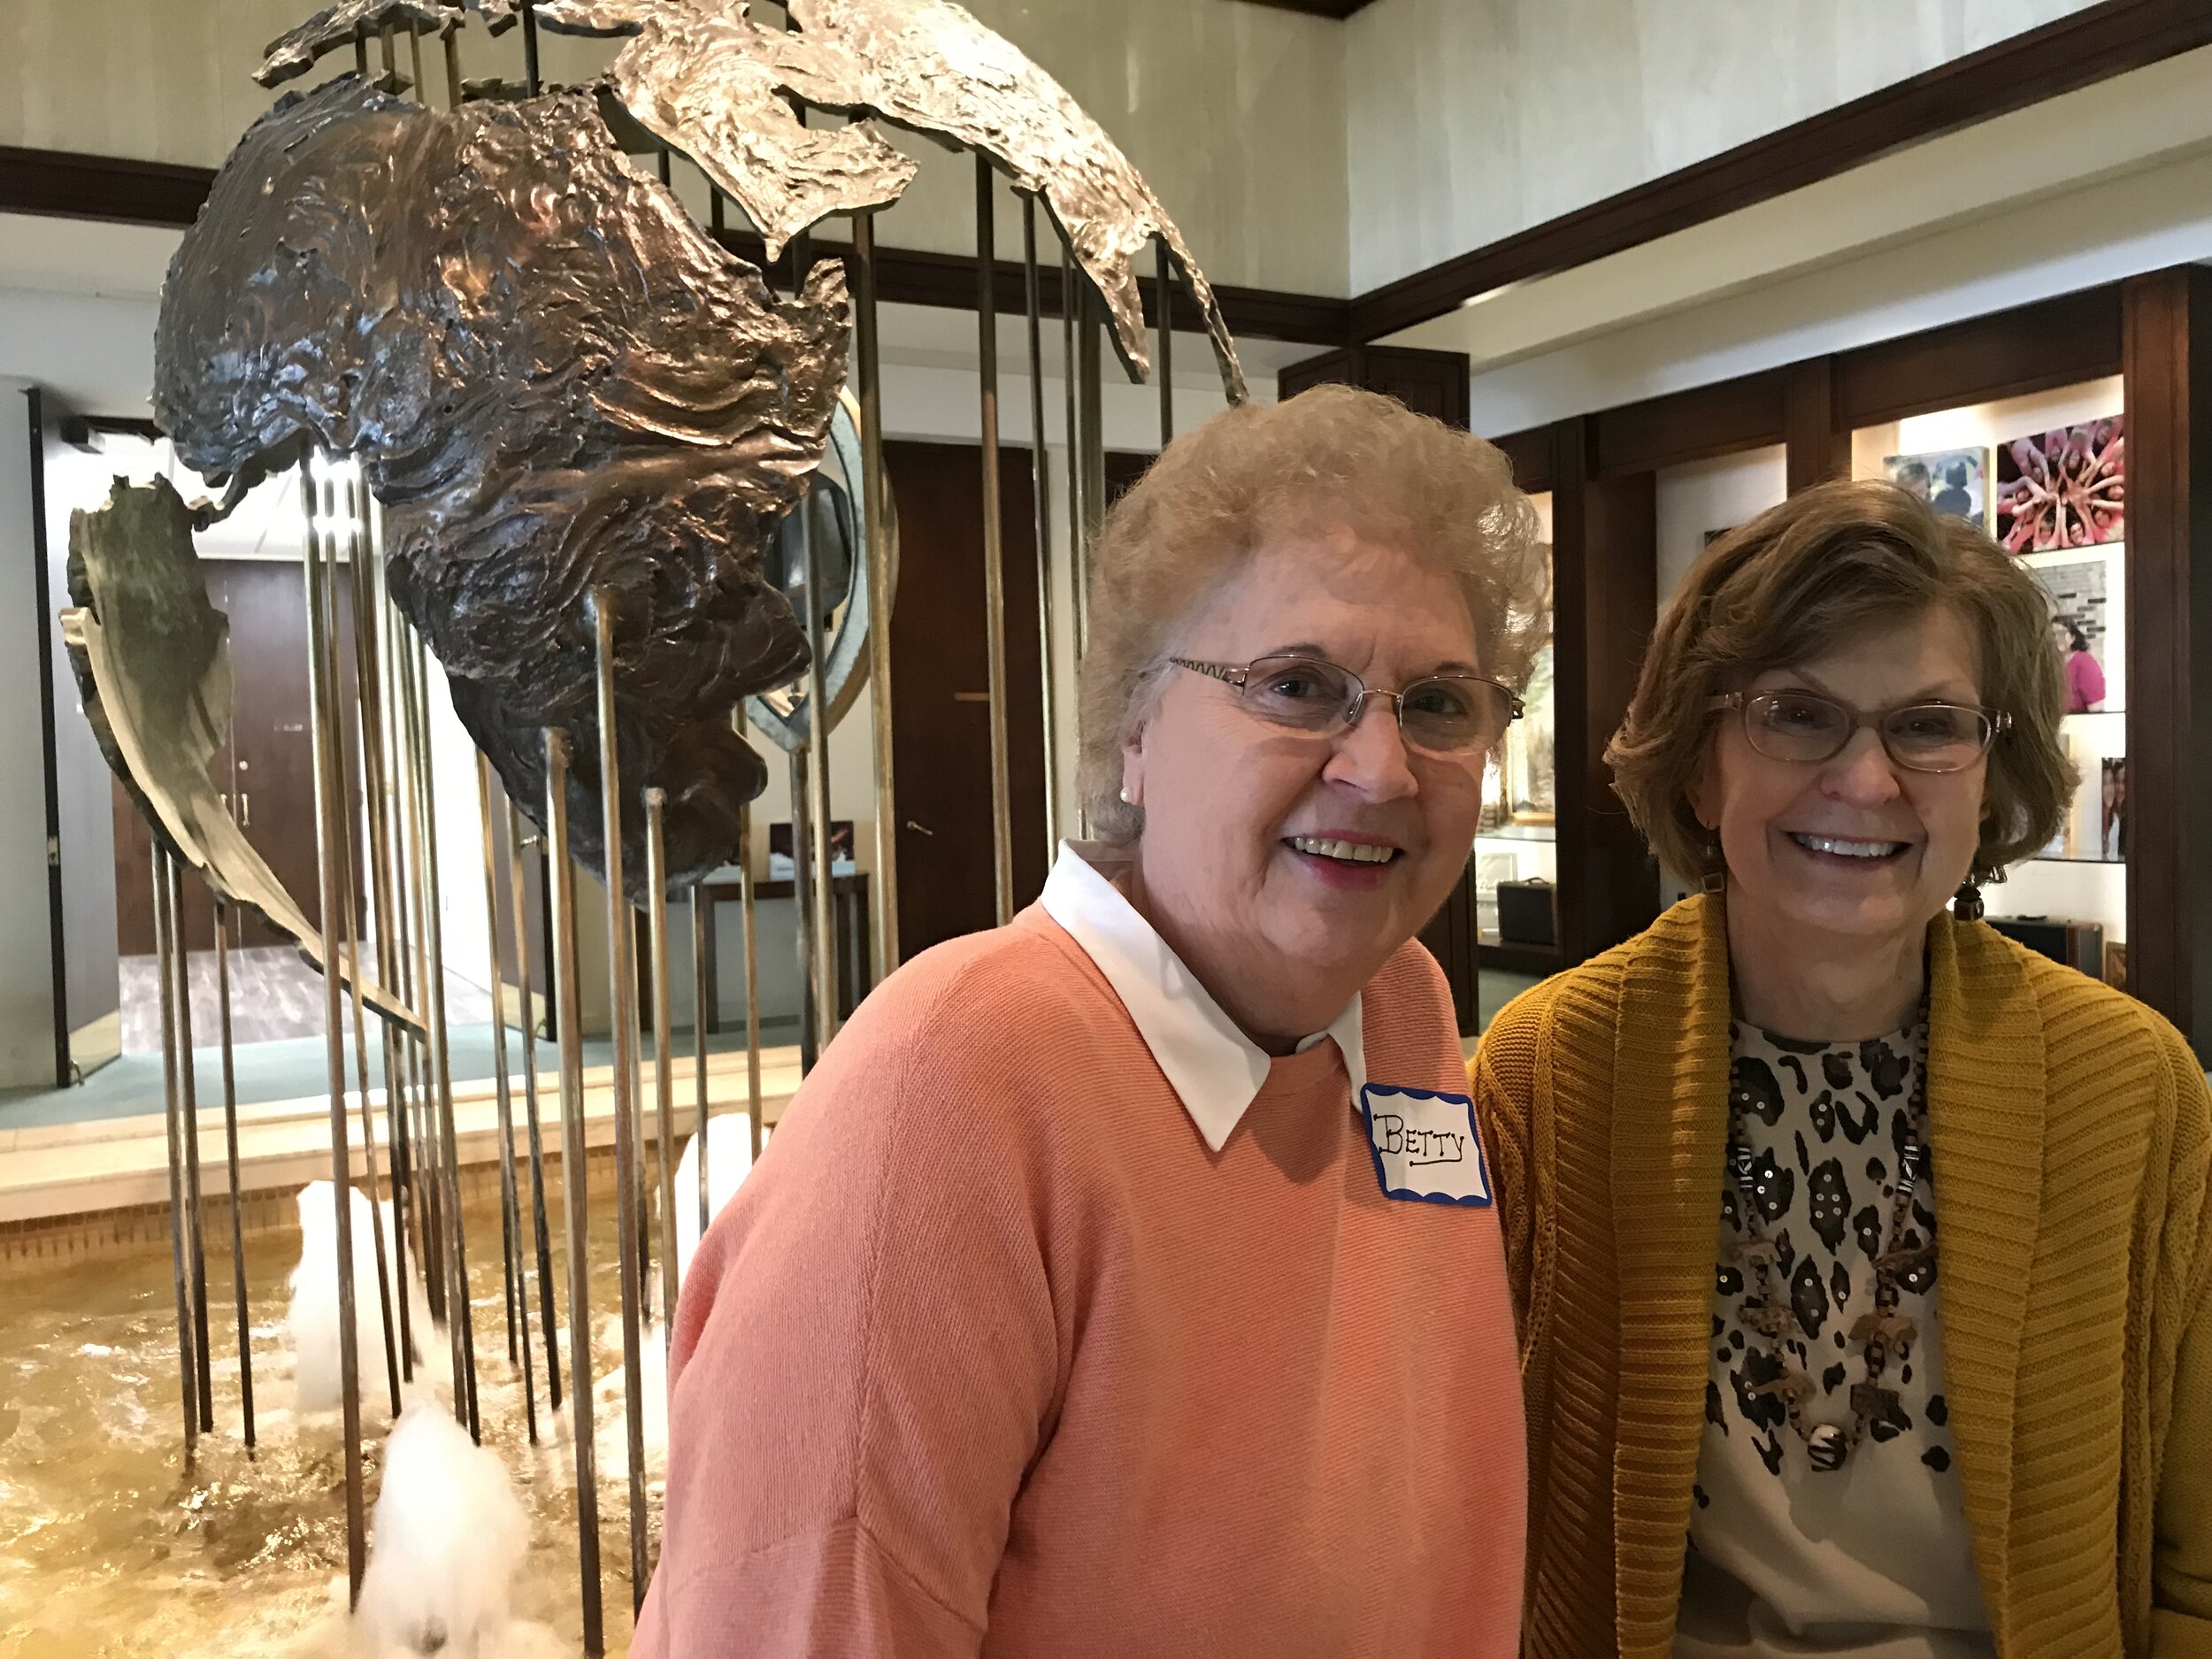 Betty Wiseman (left) with Creely Wilson (right) at the national WMU building in Birmingham, Alabama.